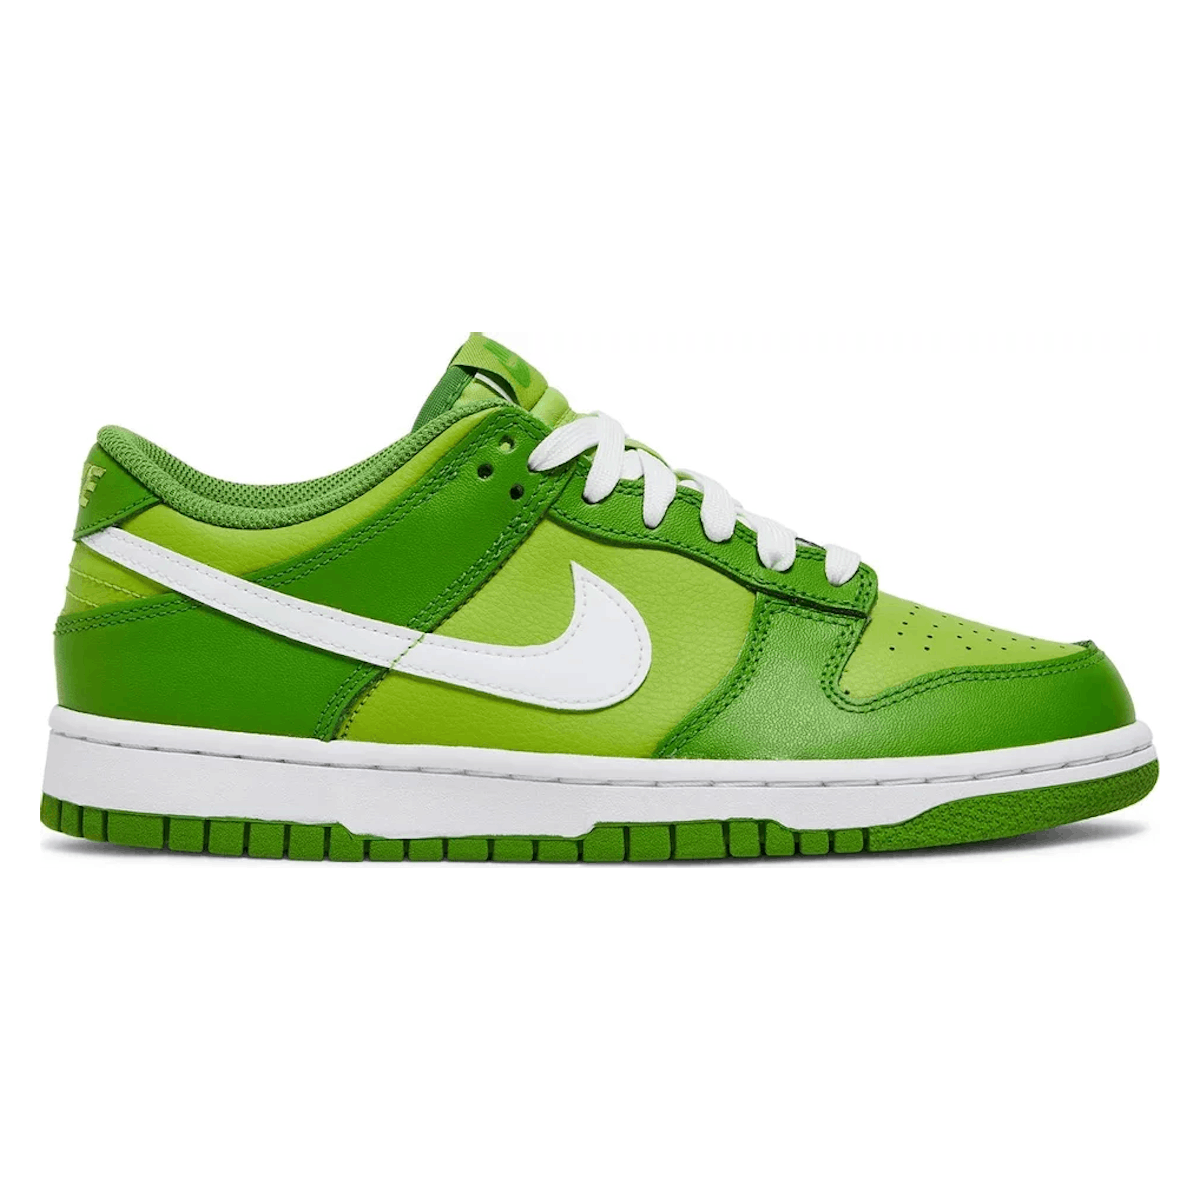 Nike Dunk Low GS "Chlorophyll"